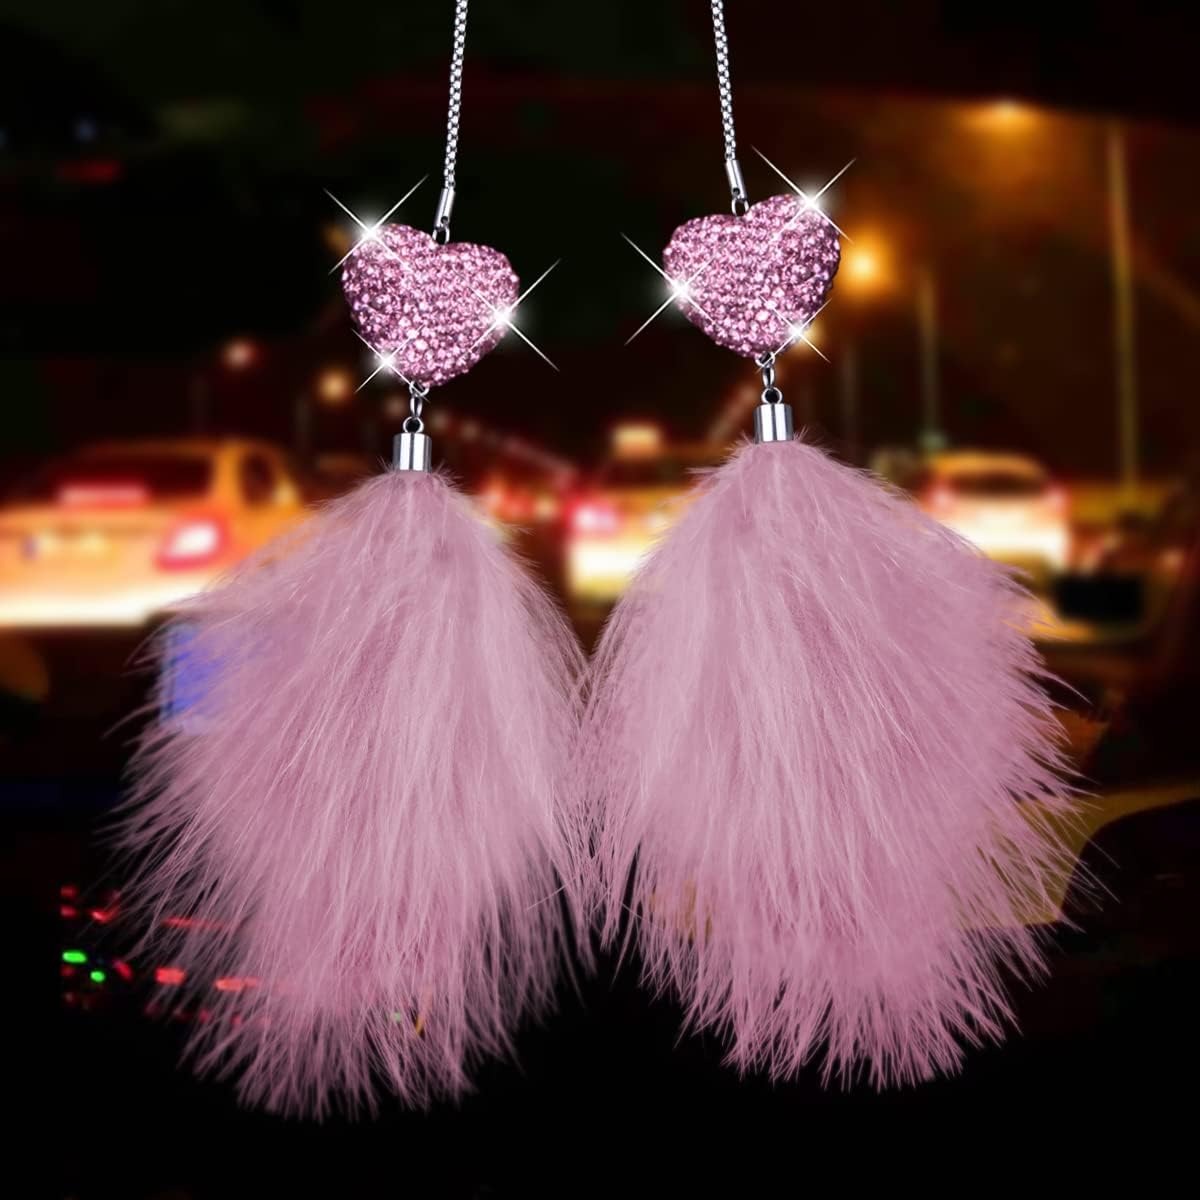 Spurtar Bling Car Mirror Hanging Accessories for Women Shiny Heart Shape Crystal Diamond Car Ornament with Plush Feather Pendant Rearview M